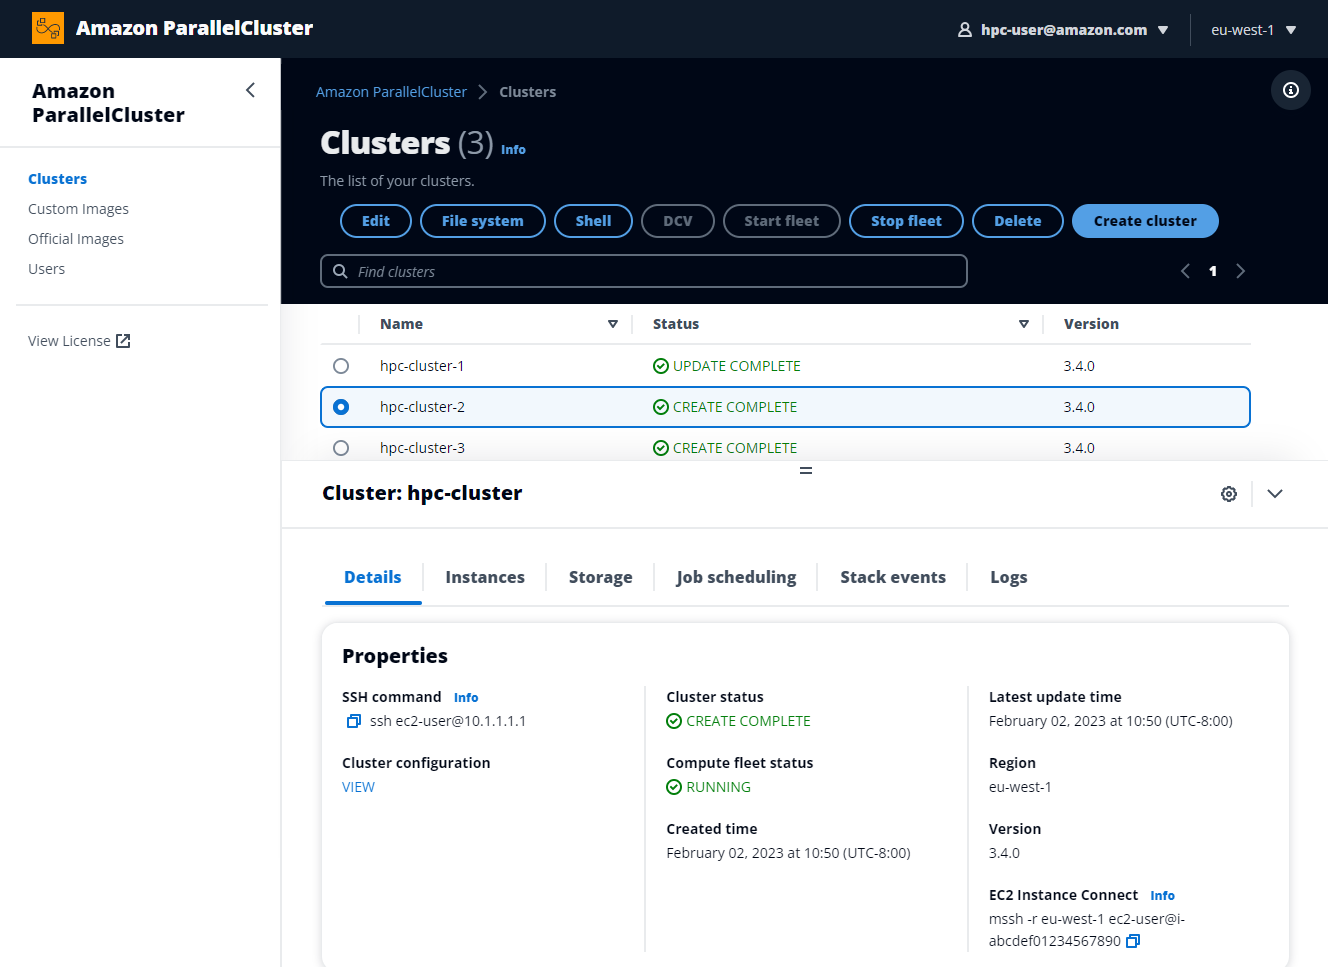 In the Amazon ParallelCluster UI home page, you can create, edit, and delete a cluster You can also view your list of clusters and selected cluster details, and navigate to clusters, official images, custom images, and users.